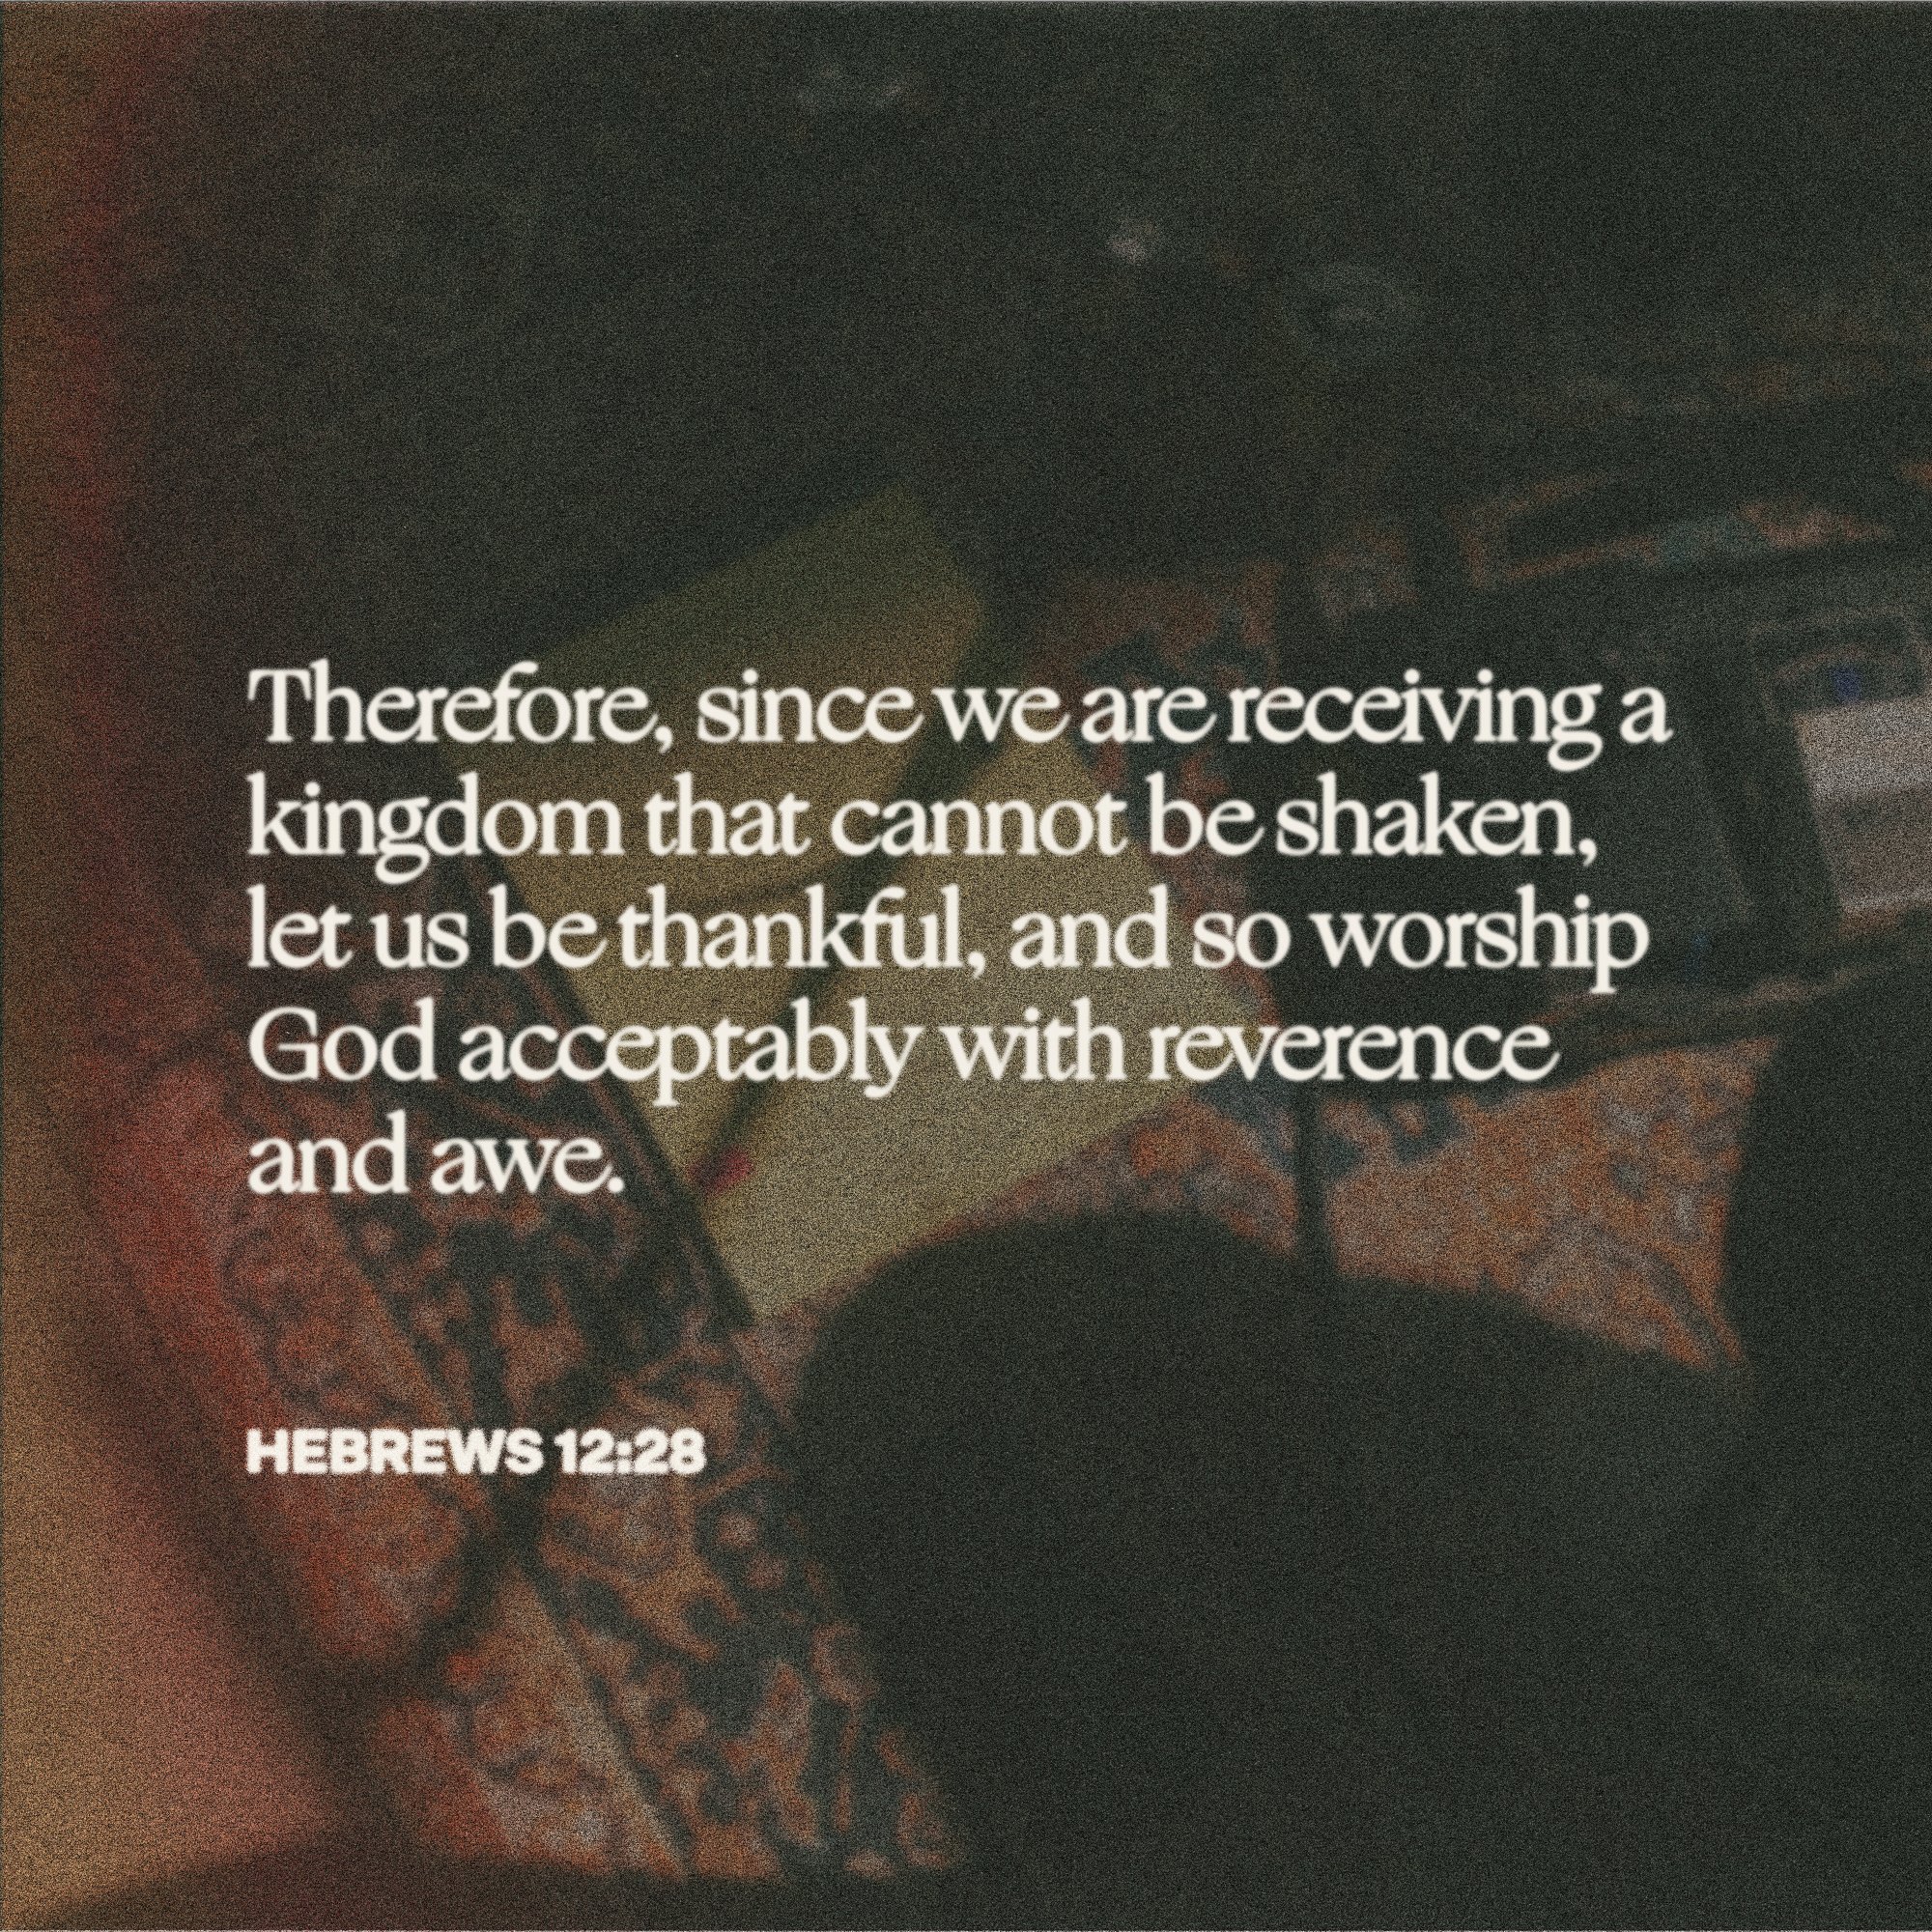 Therefore, sincewe arereceivinga kingdom that cannot be shaken; let us bethankful, and s0 worship God acceptably with reverence and awe. hebreWS 12.28